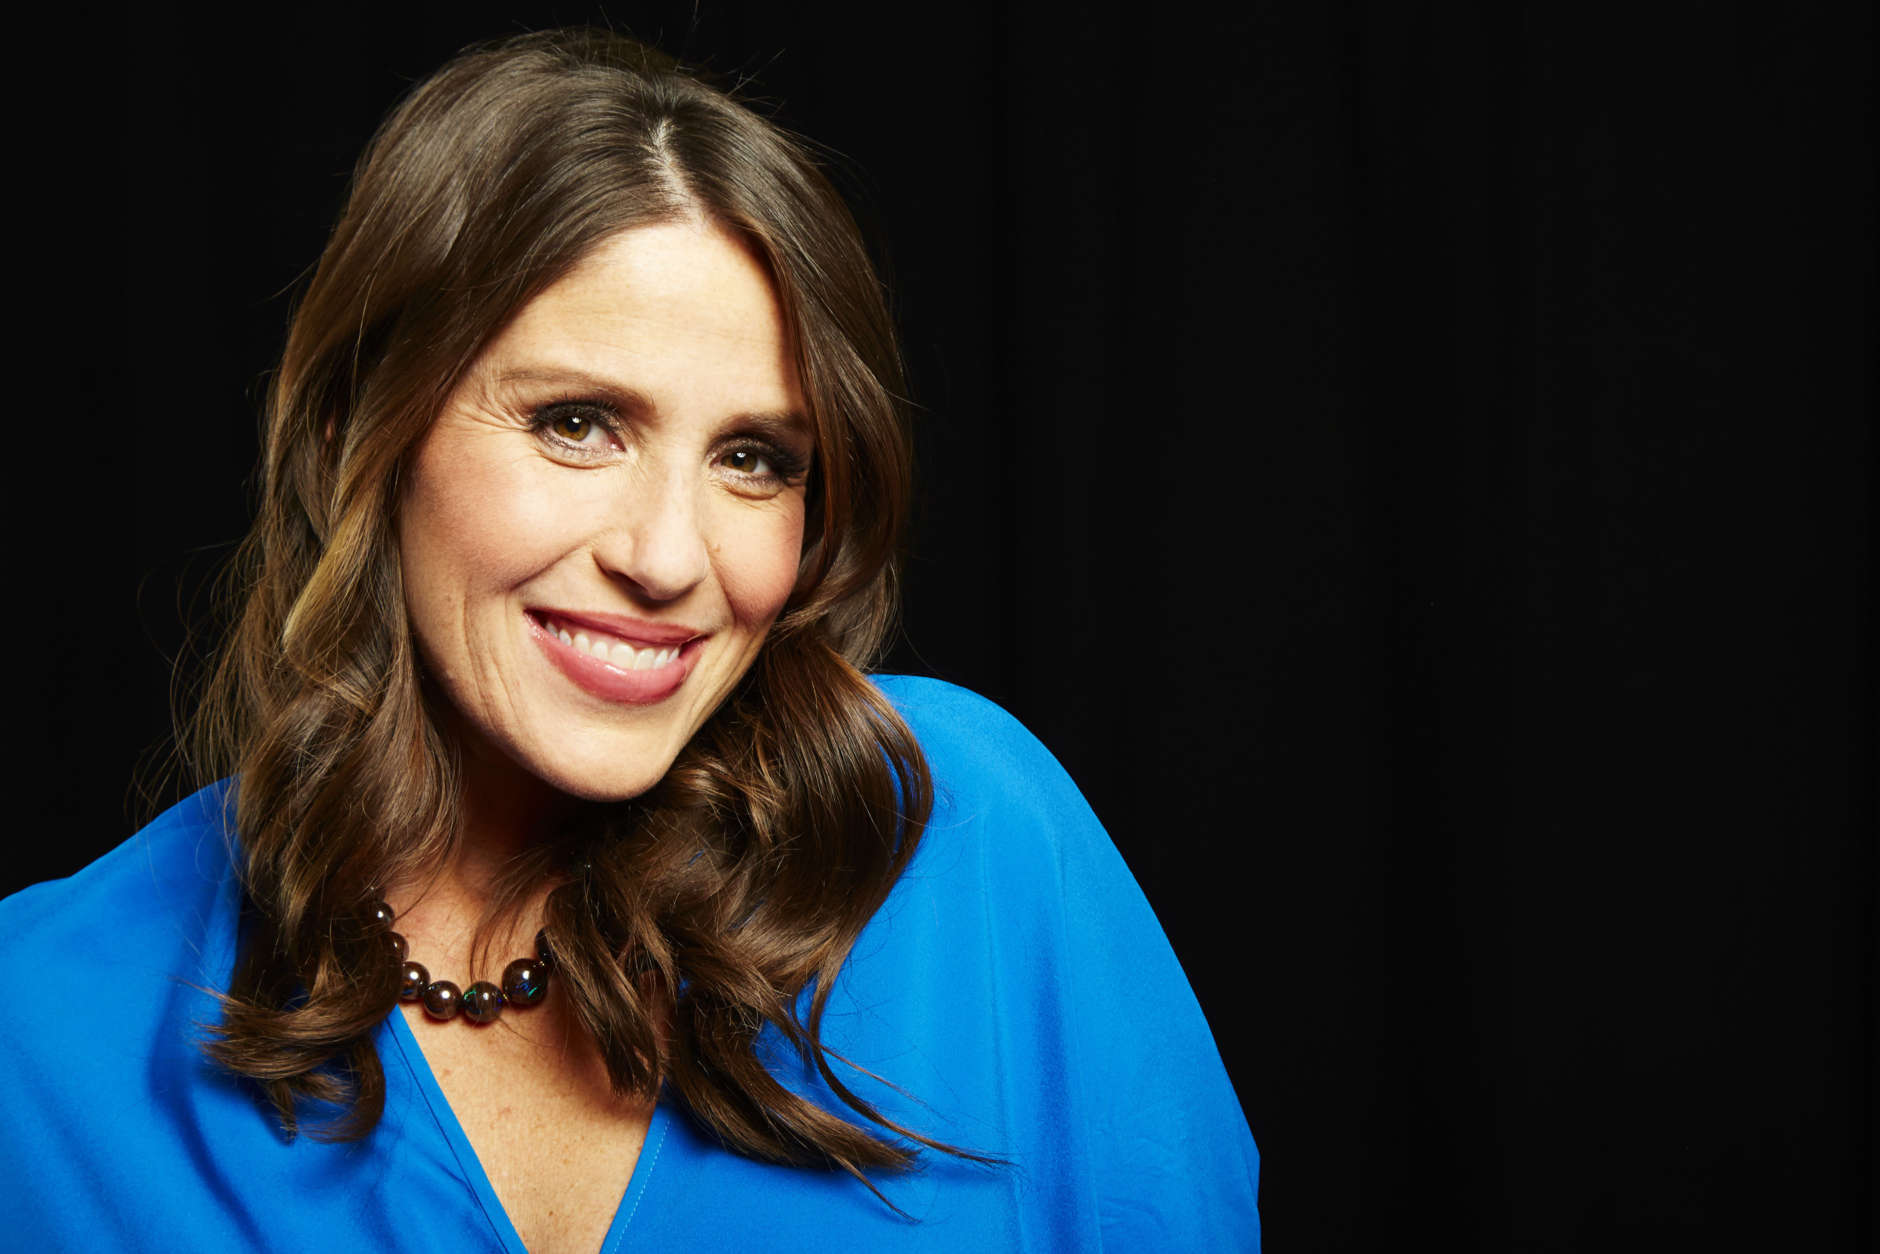 Actress Soleil Moon Frye poses for a portrait in promotion of her upcoming role hosting the 3rd season of "Home Made Simple," on OWN, on Tuesday, Oct. 15, 2013 in New York. (Photo by Dan Hallman/Invision/AP)